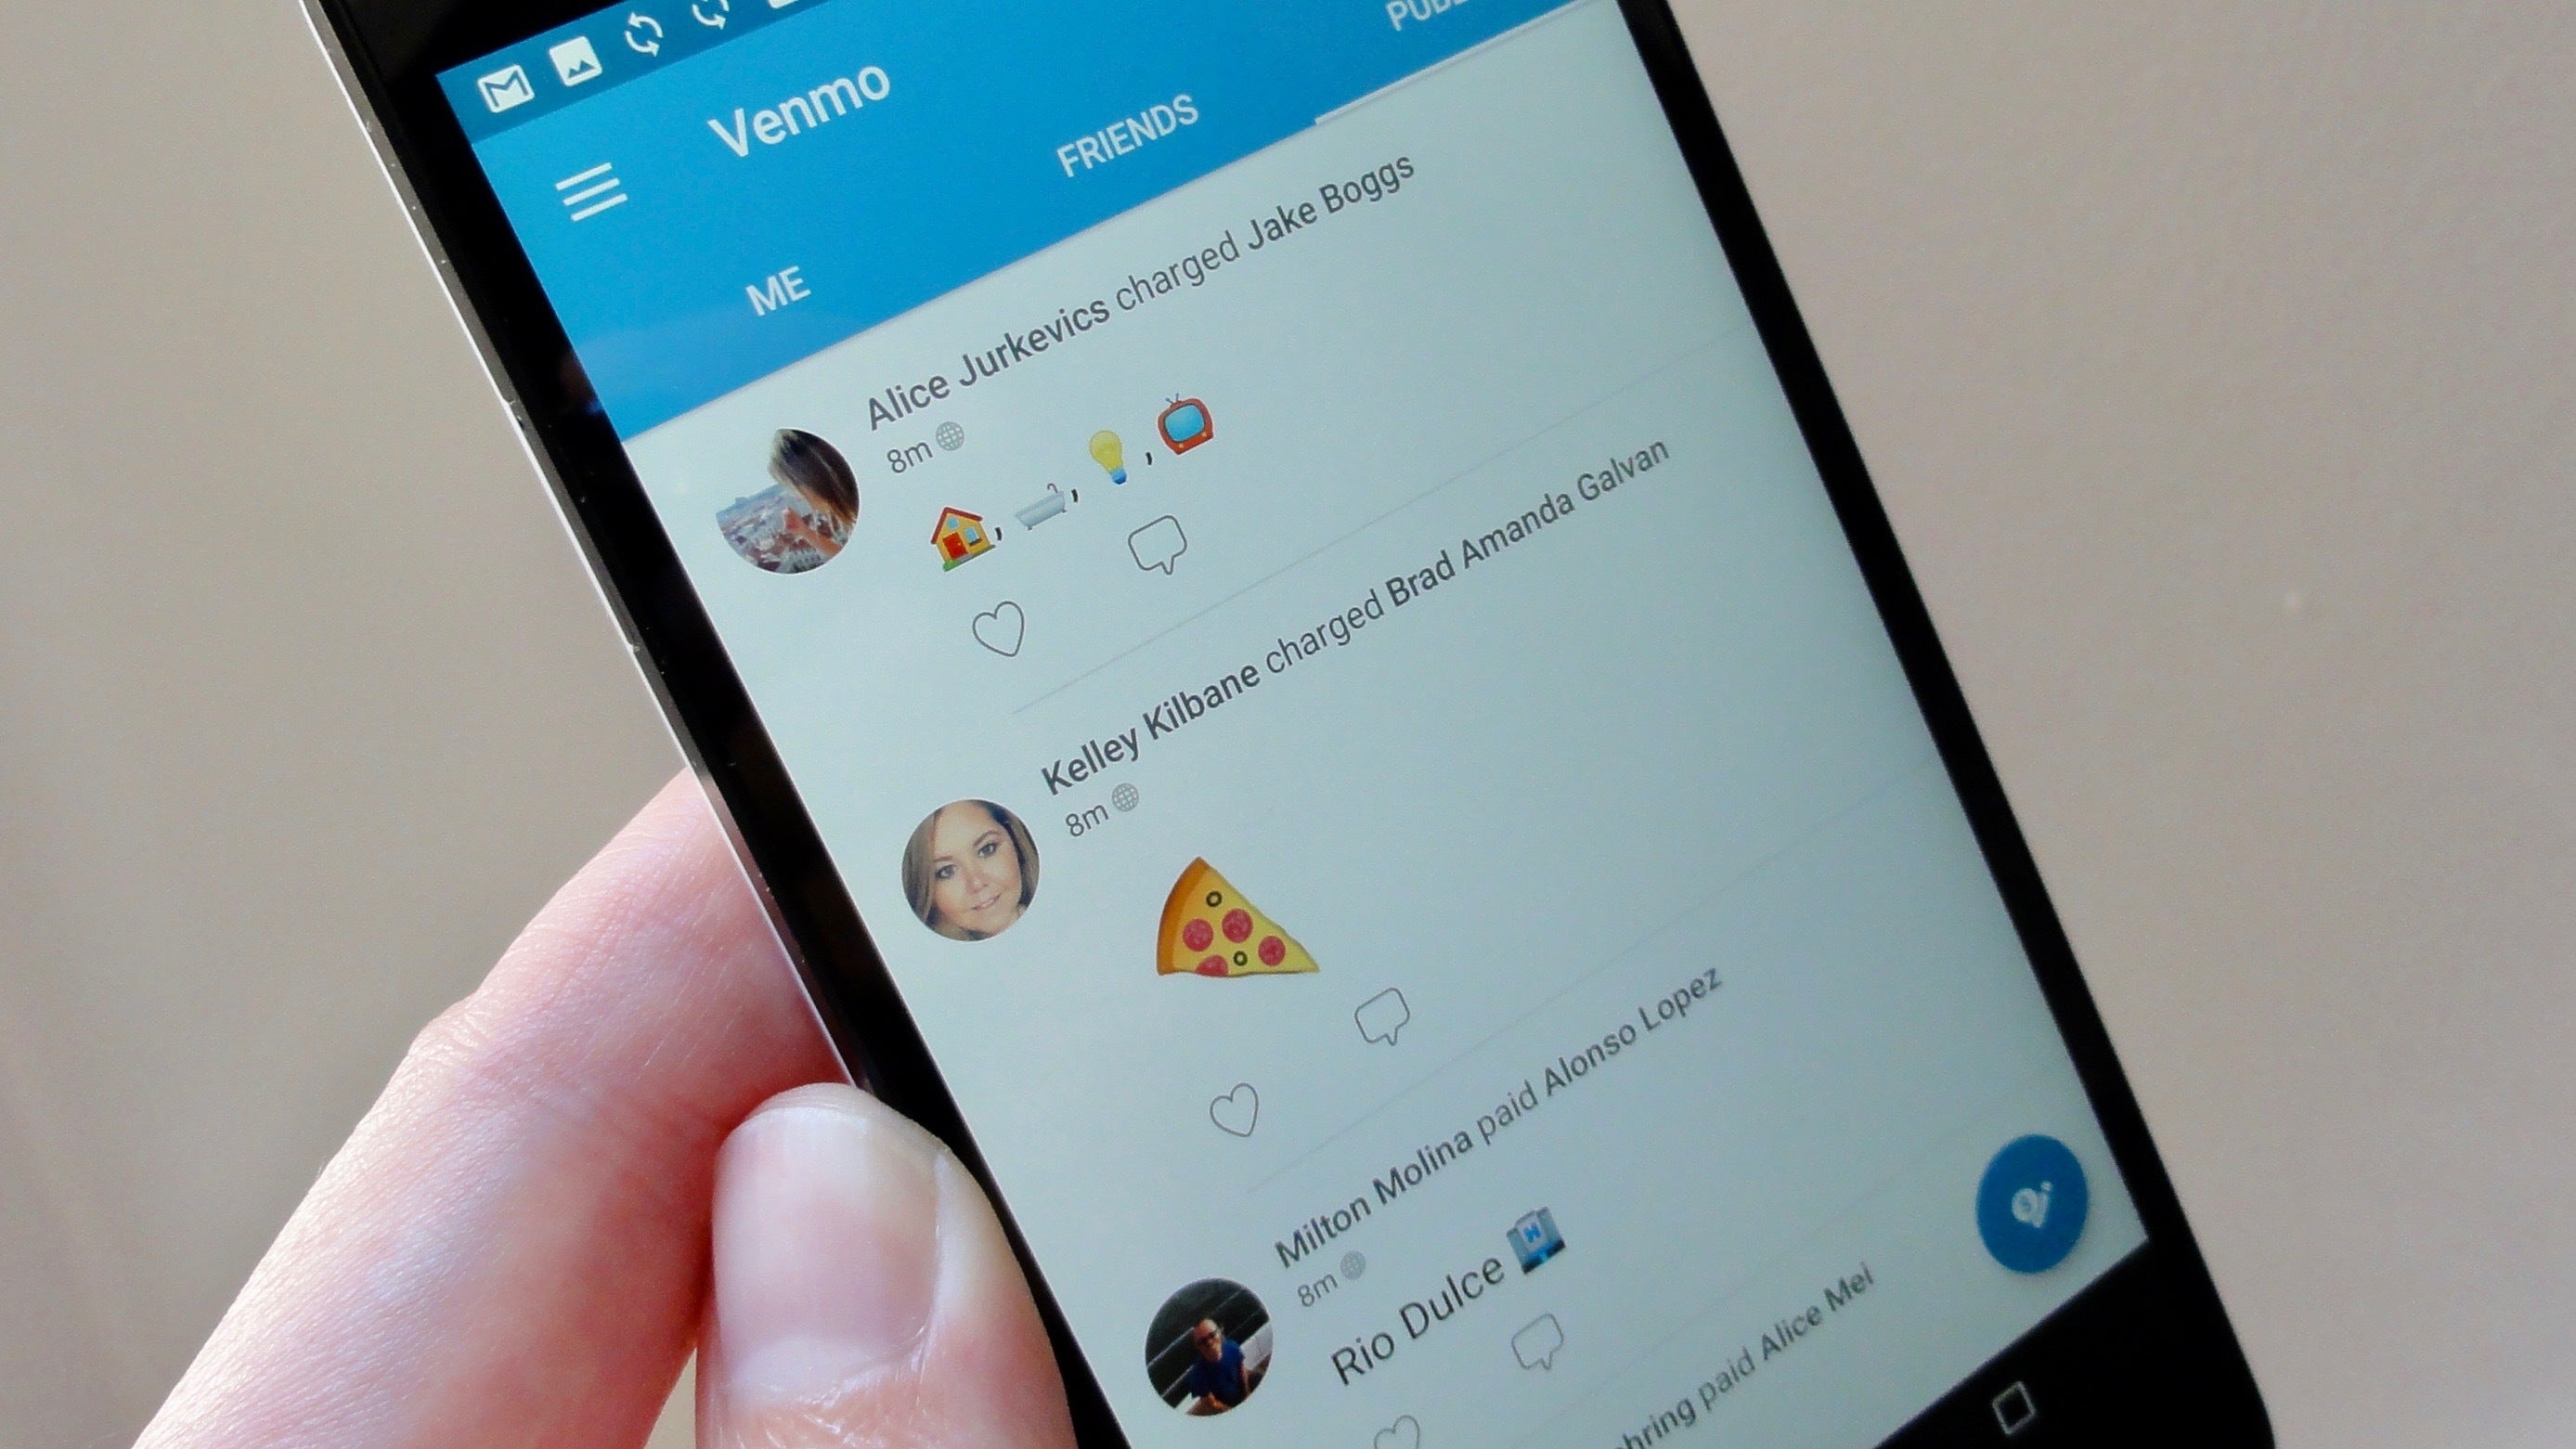 your friend on your contact should be on venmo friends list